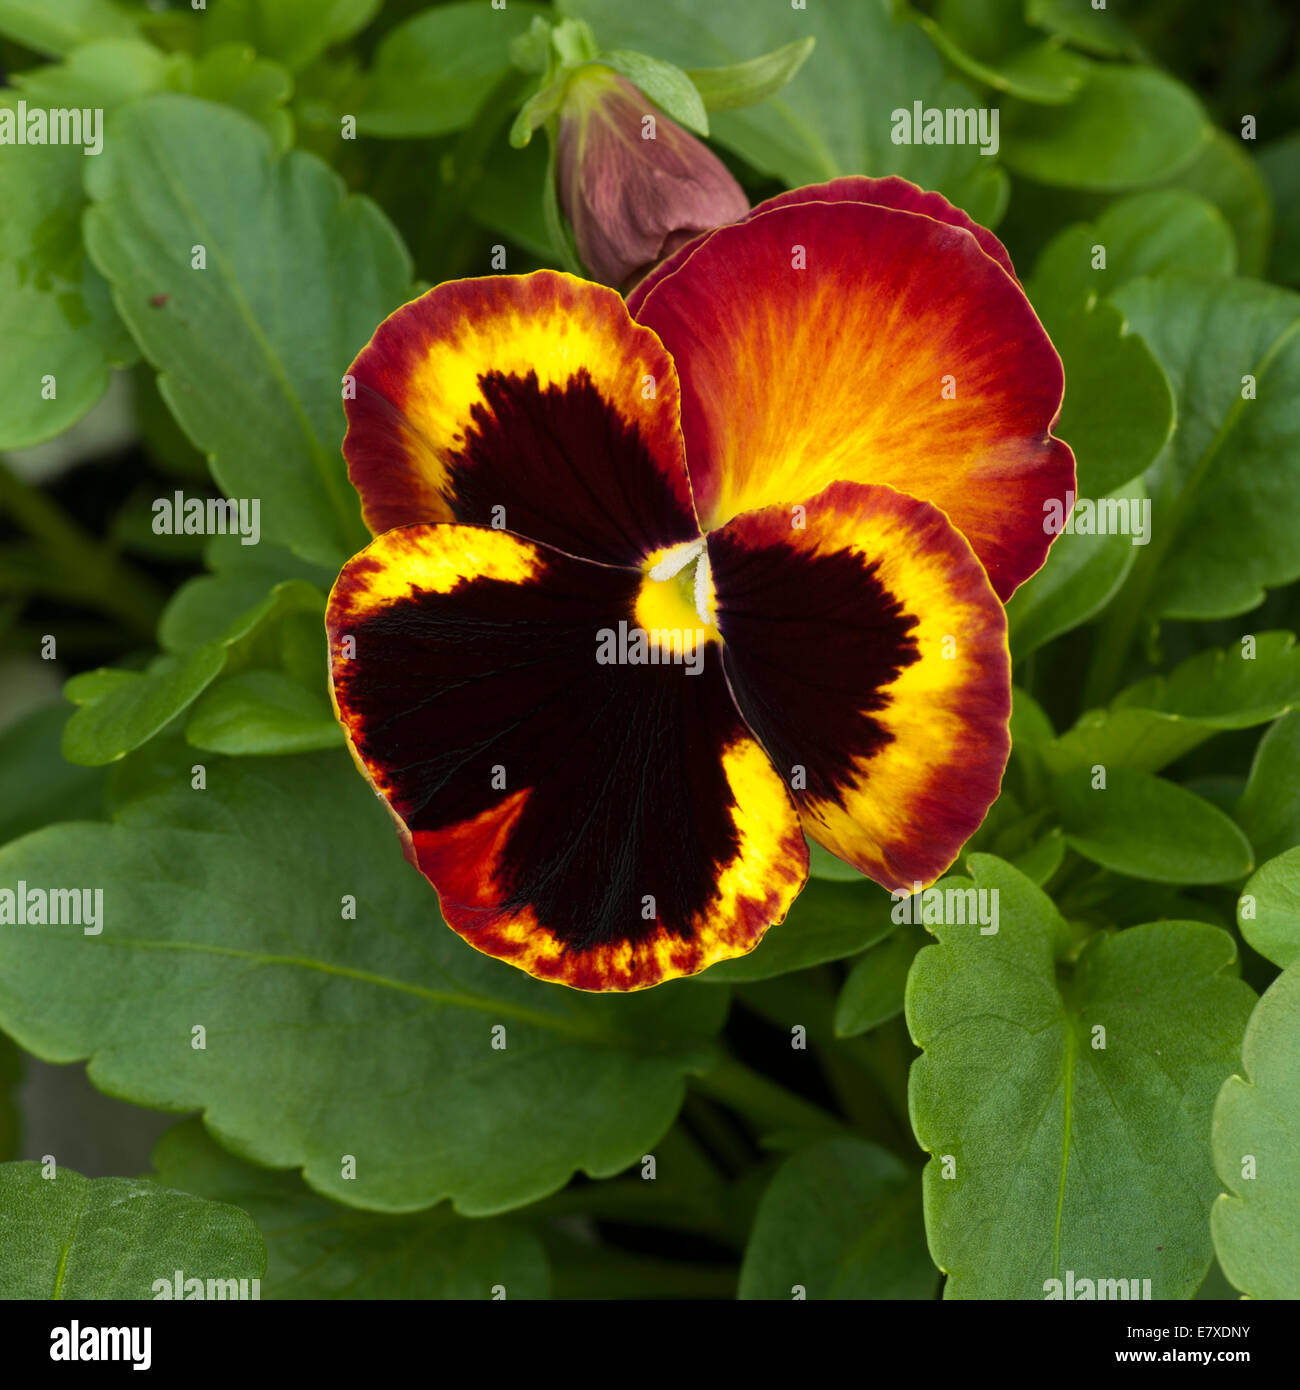 Pansy ' Fire ' Stock Photo